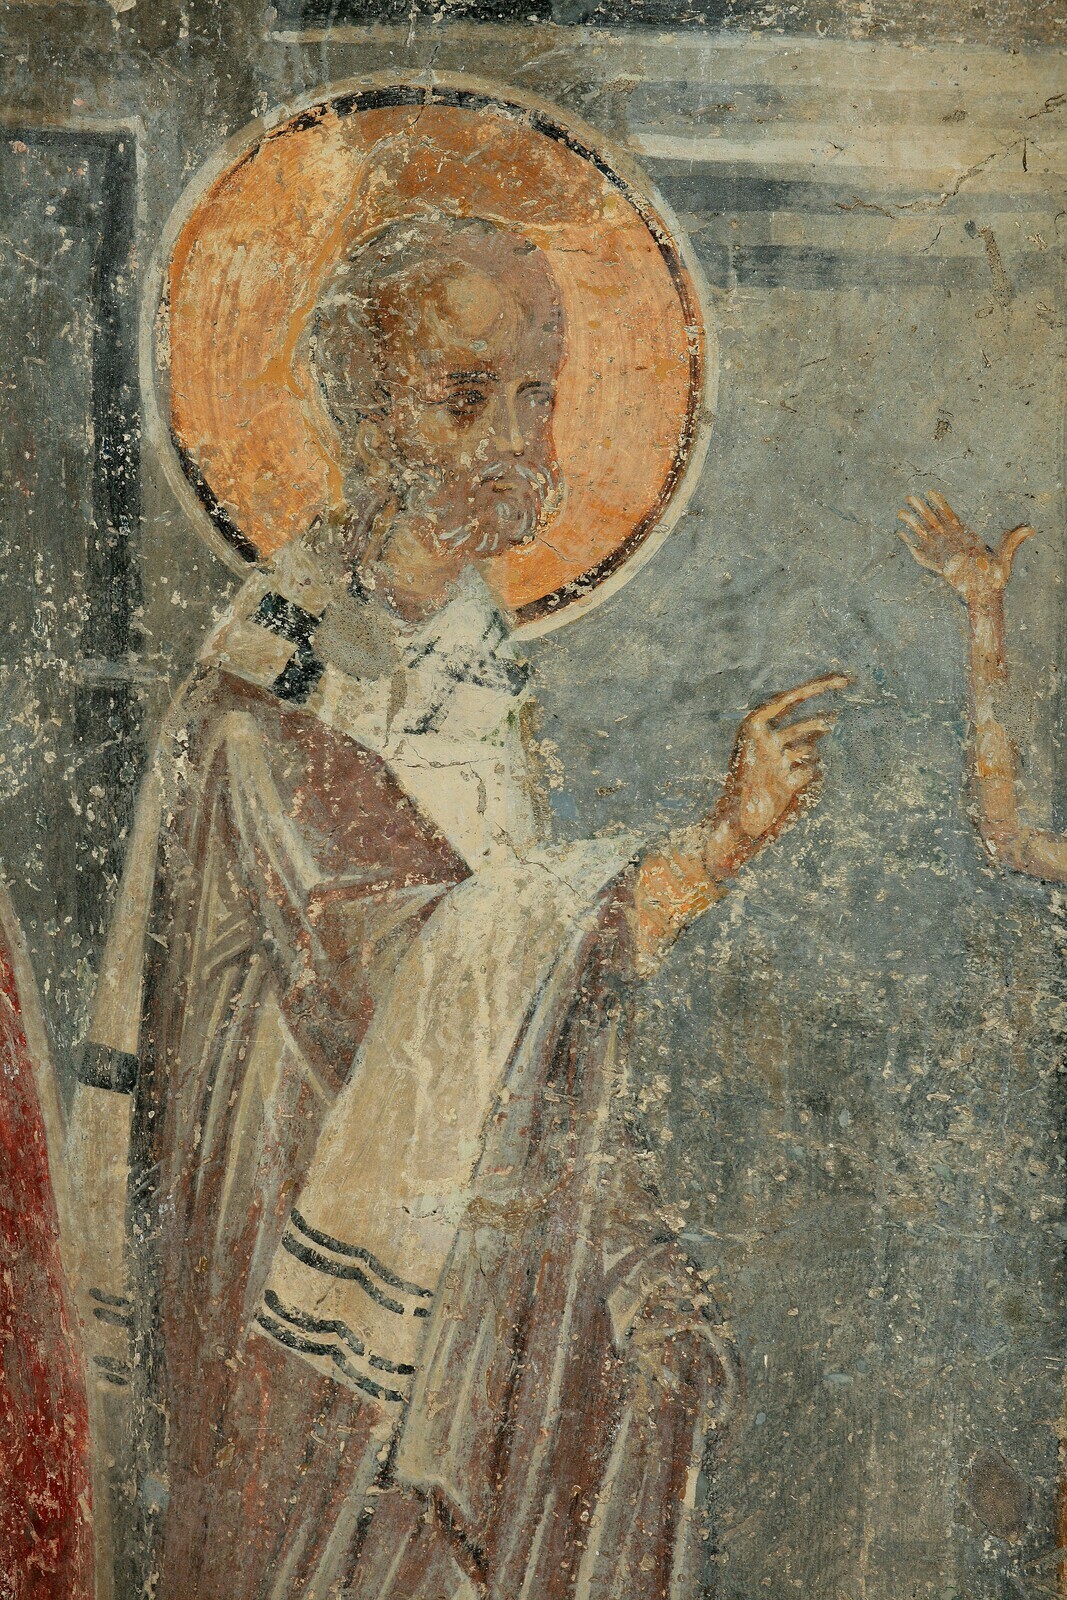 Saint Nicholas Excorcising Demon from the Possessed, detail